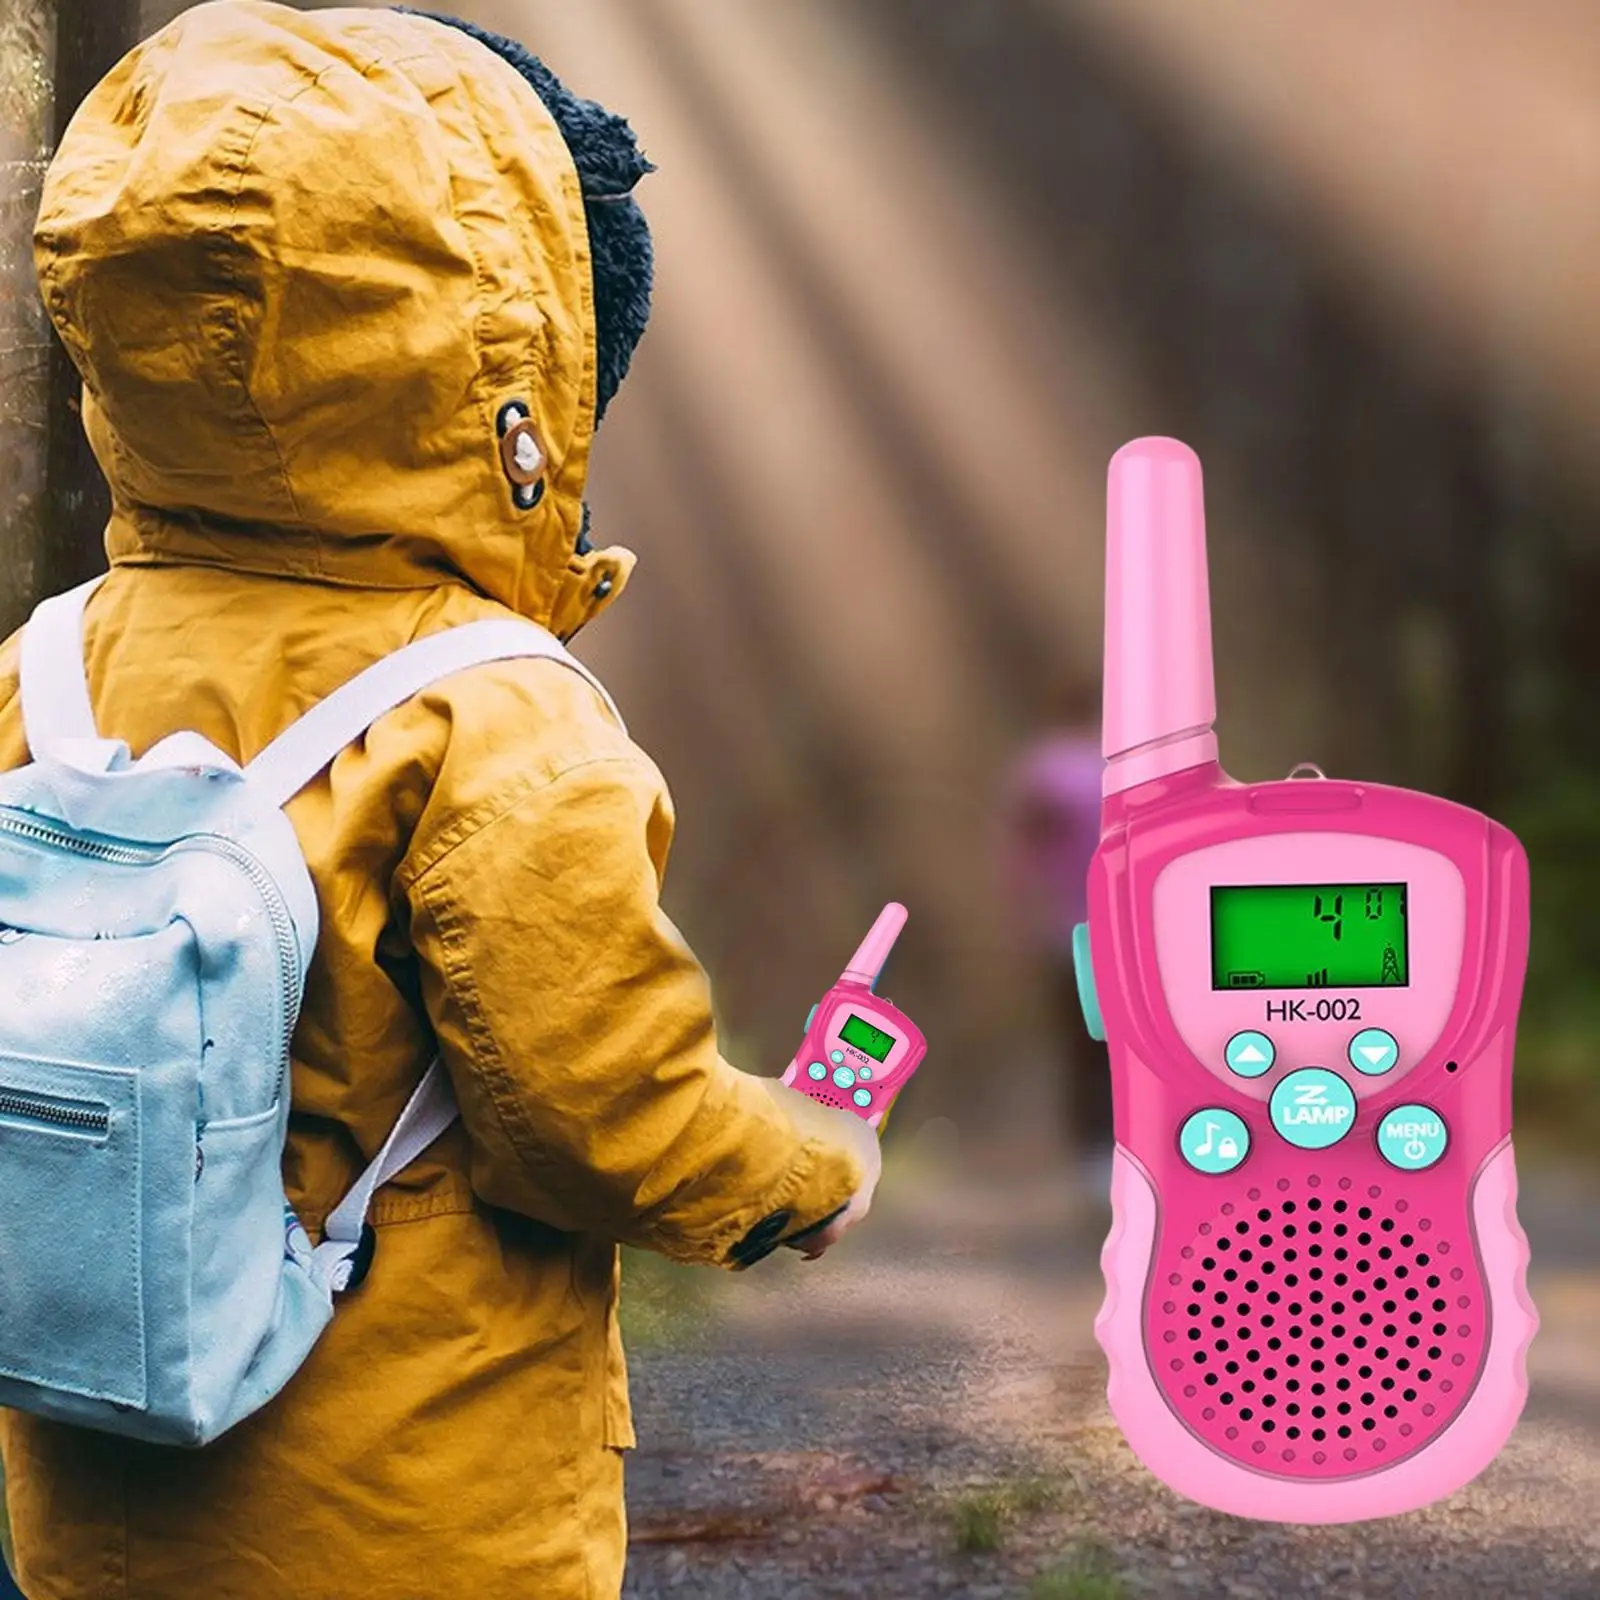 2Pcs Kids Walkie Talkie 22 Channels Easy to Use Long Distance 2km Birthday Gift 2 Way Radio Toys for Games 3-14 Years Old Hiking